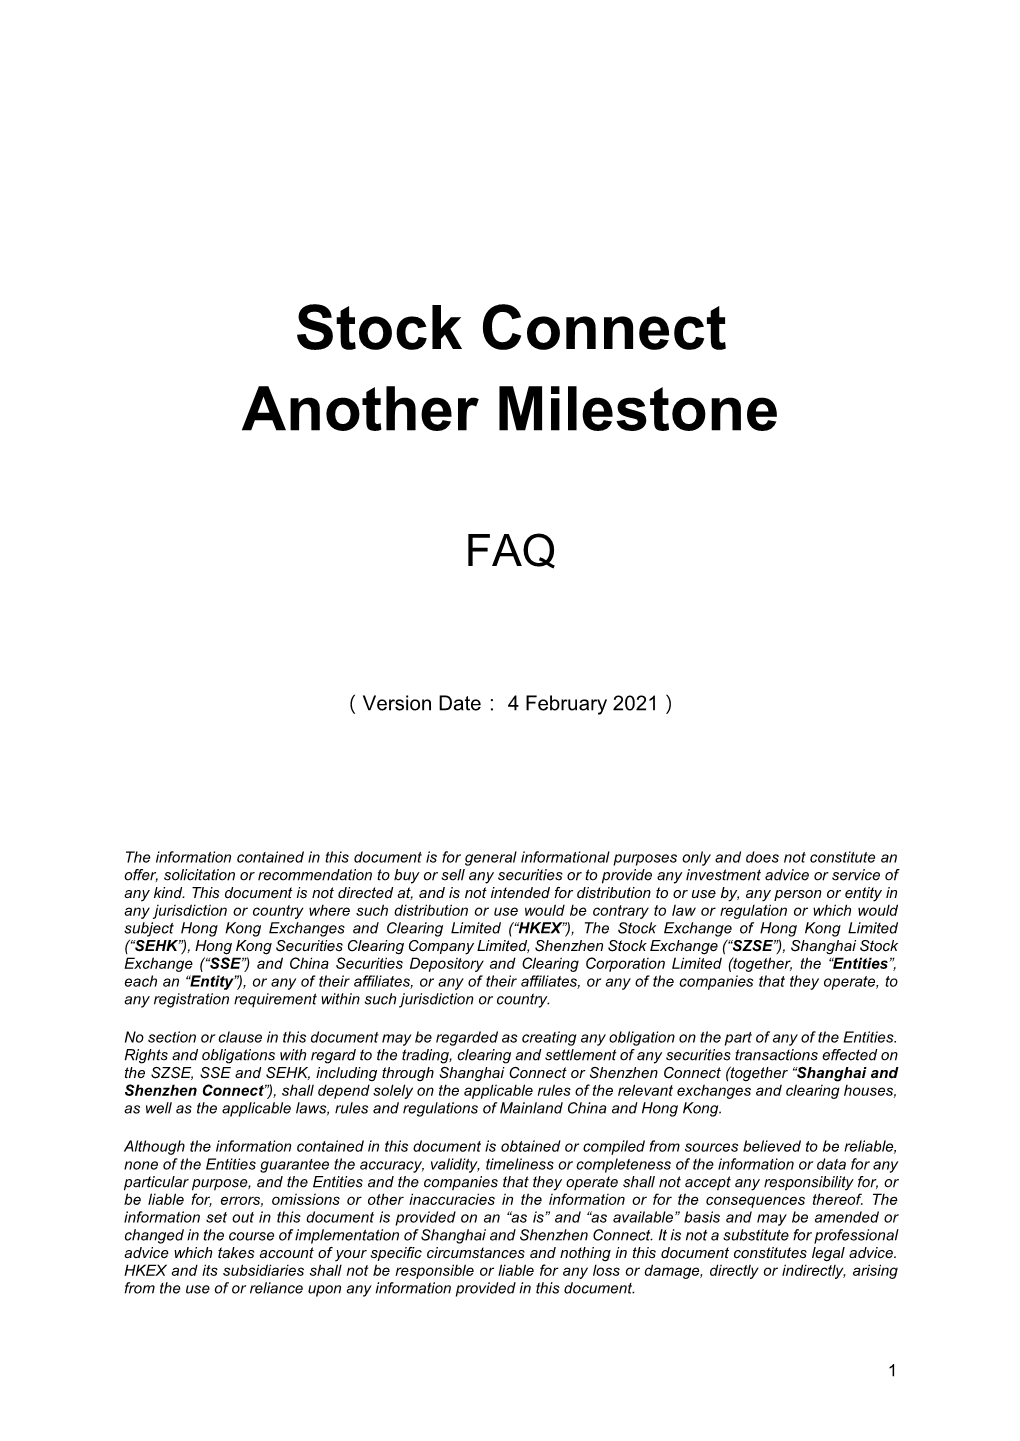 Stock Connect Another Milestone